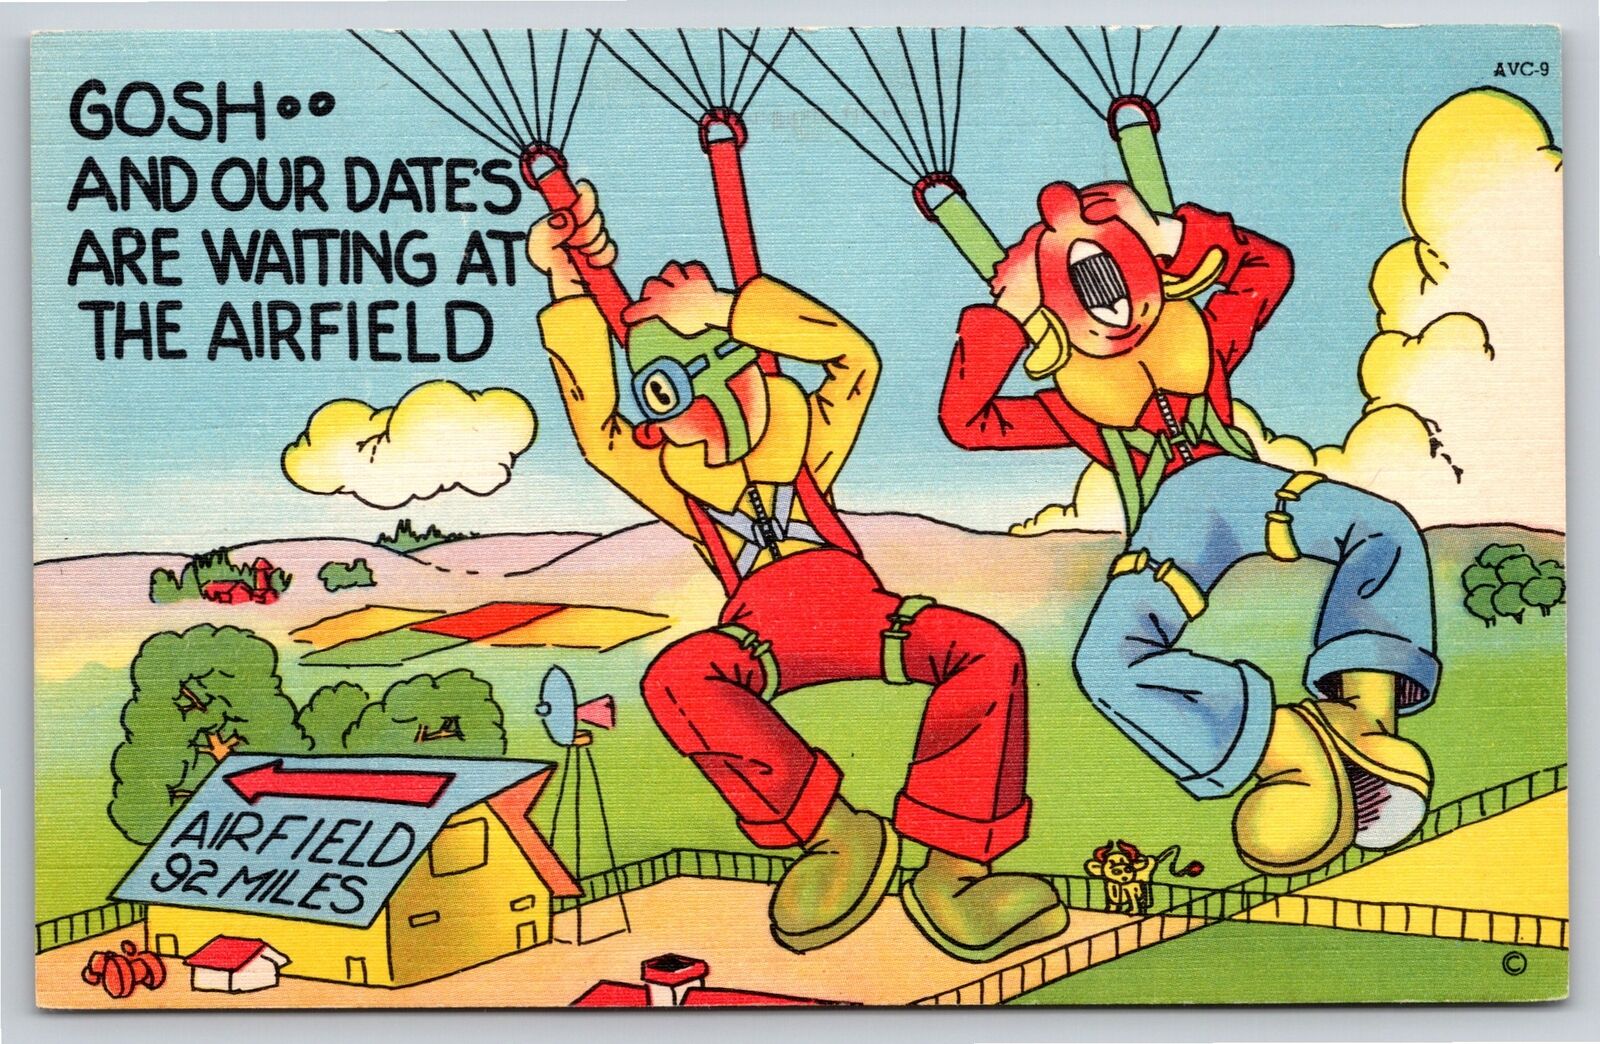 Military Comic~Paratroopers Landing In Field Dates Are Waiting~Vintage Postcard